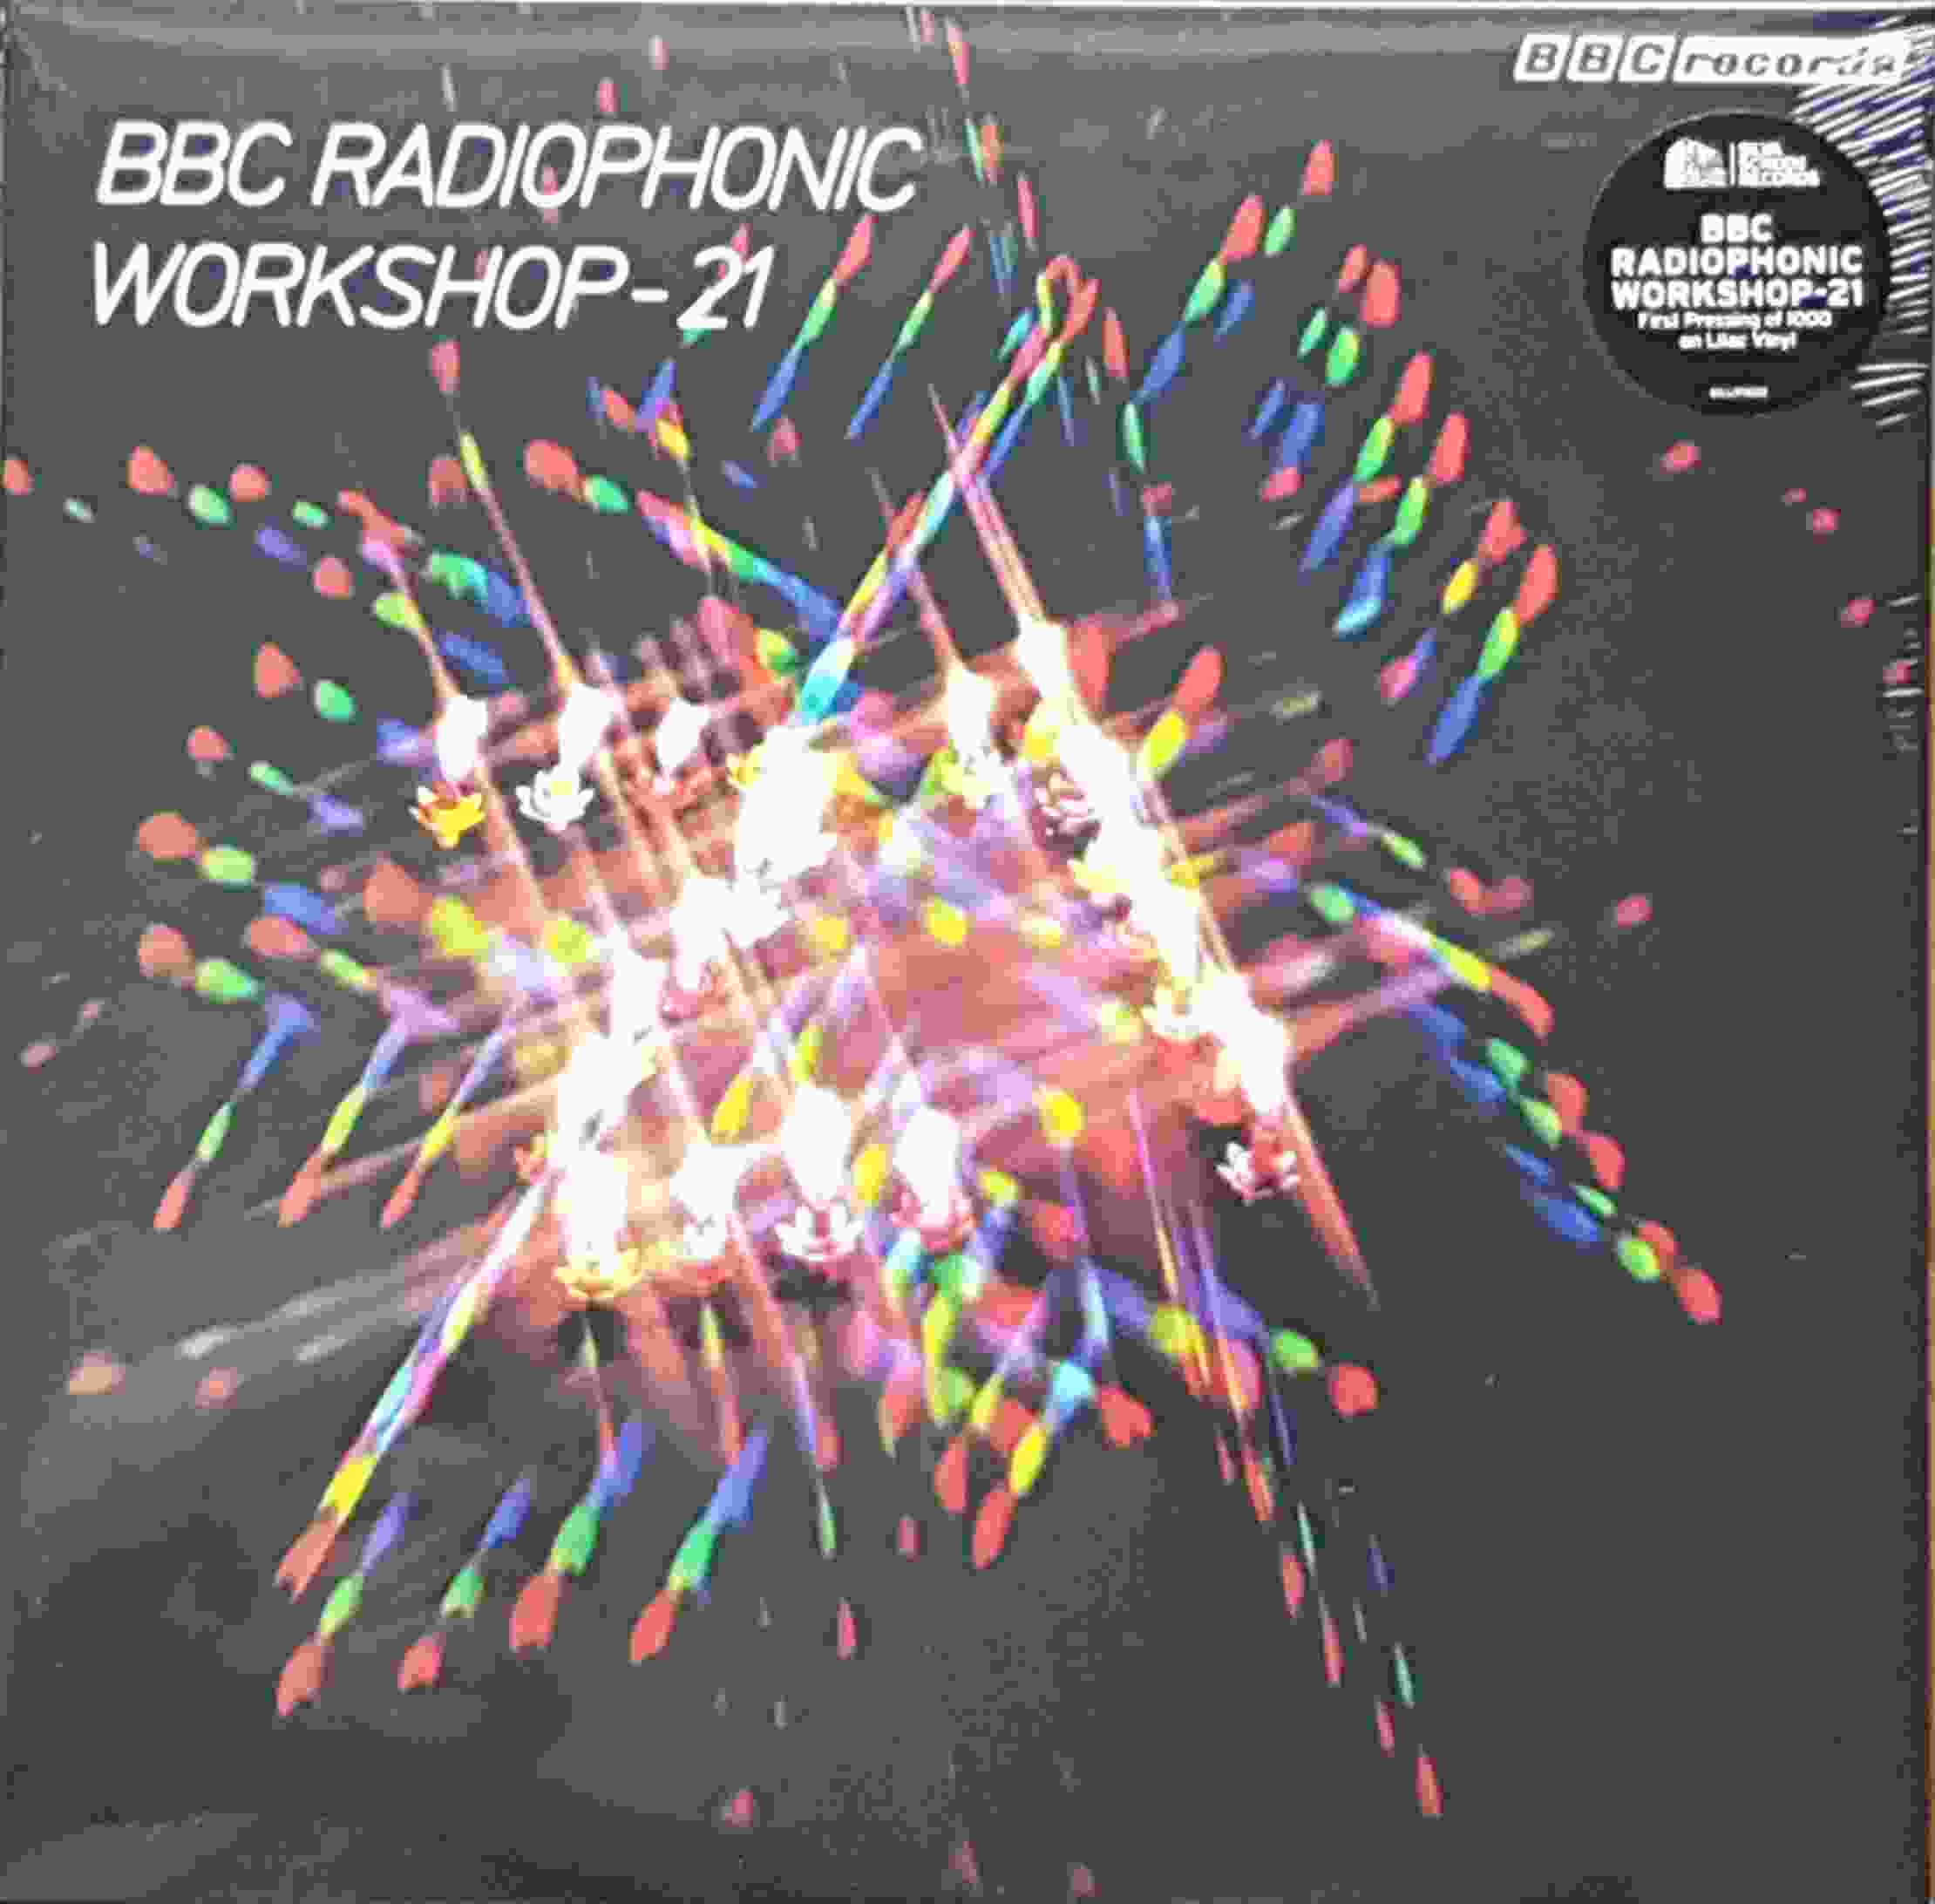 Picture of SILLP 1503 BBC Radiophonic Workshop 21 by artist Various from the BBC records and Tapes library